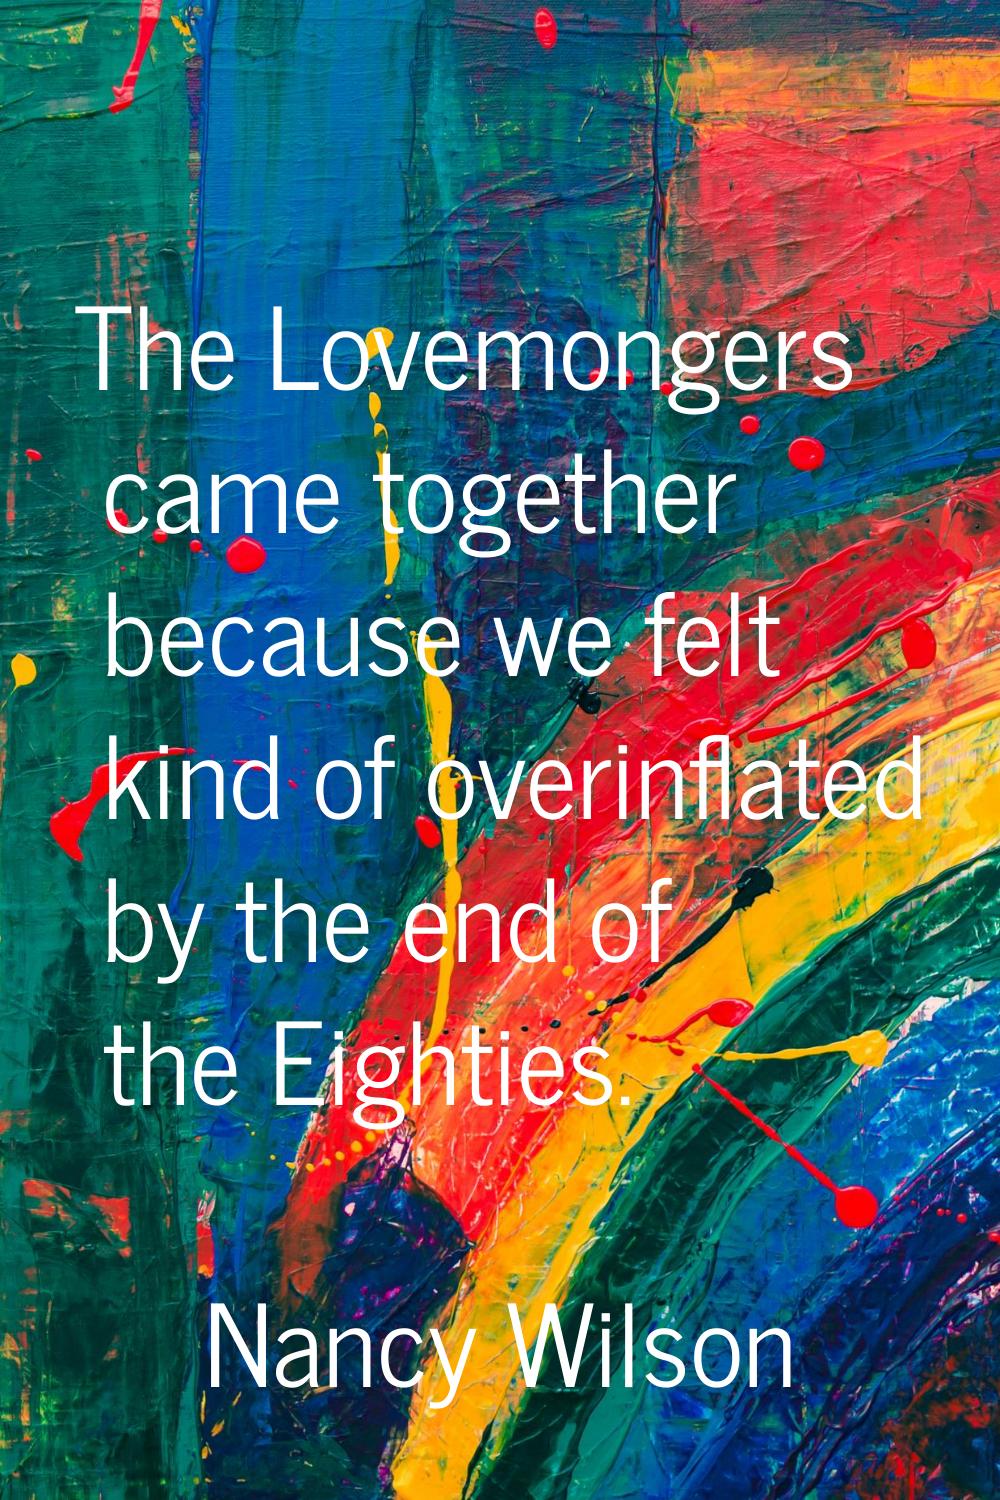 The Lovemongers came together because we felt kind of overinflated by the end of the Eighties.